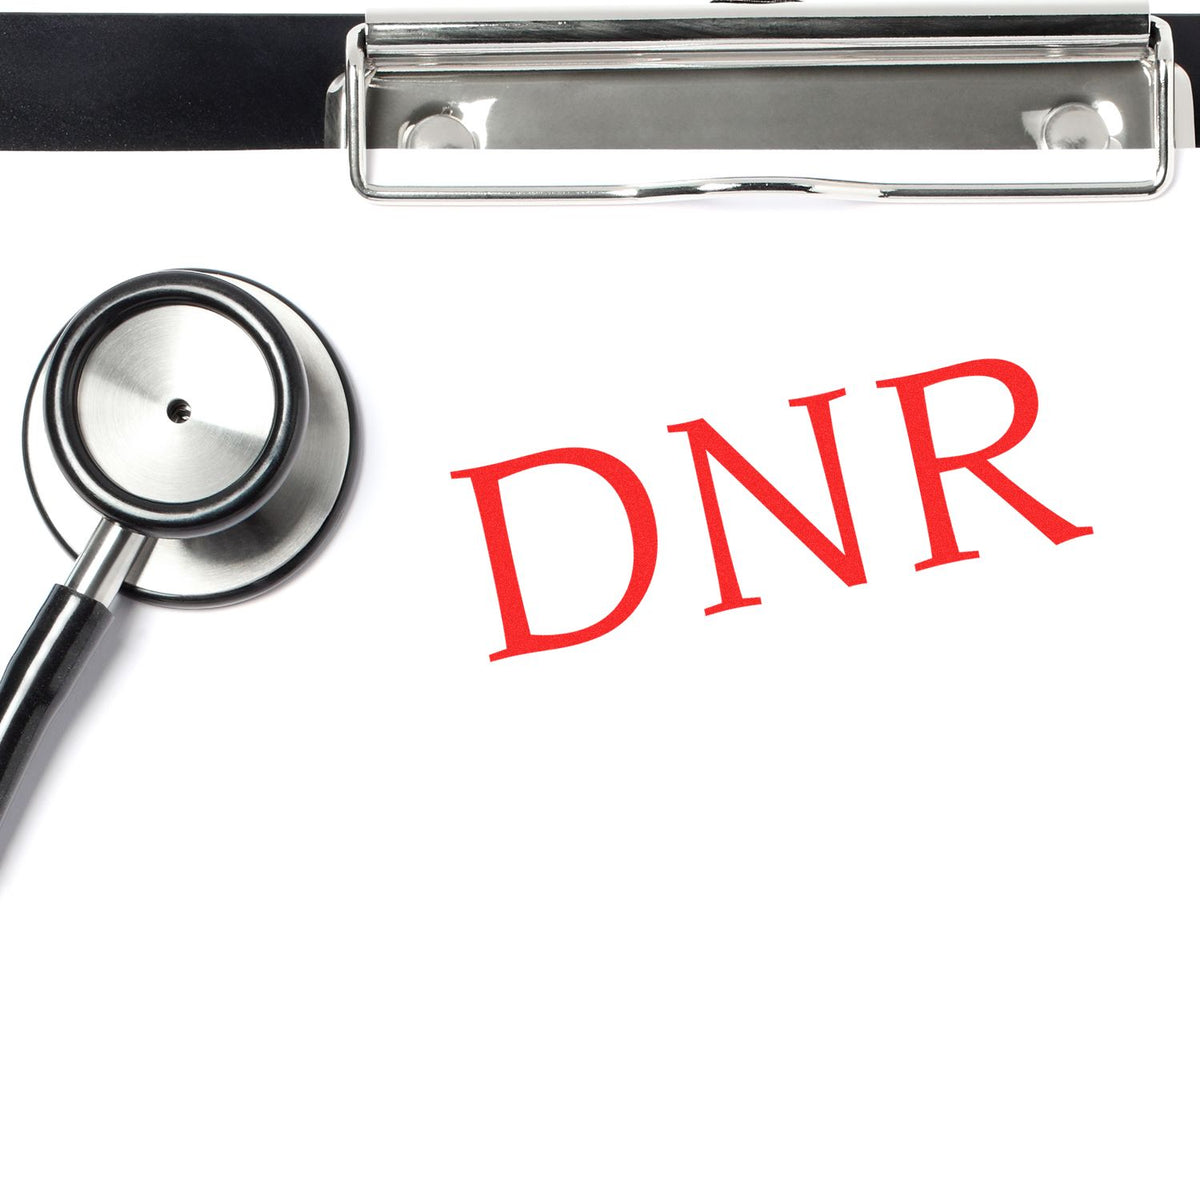 Large DNR Rubber Stamp In Use Photo